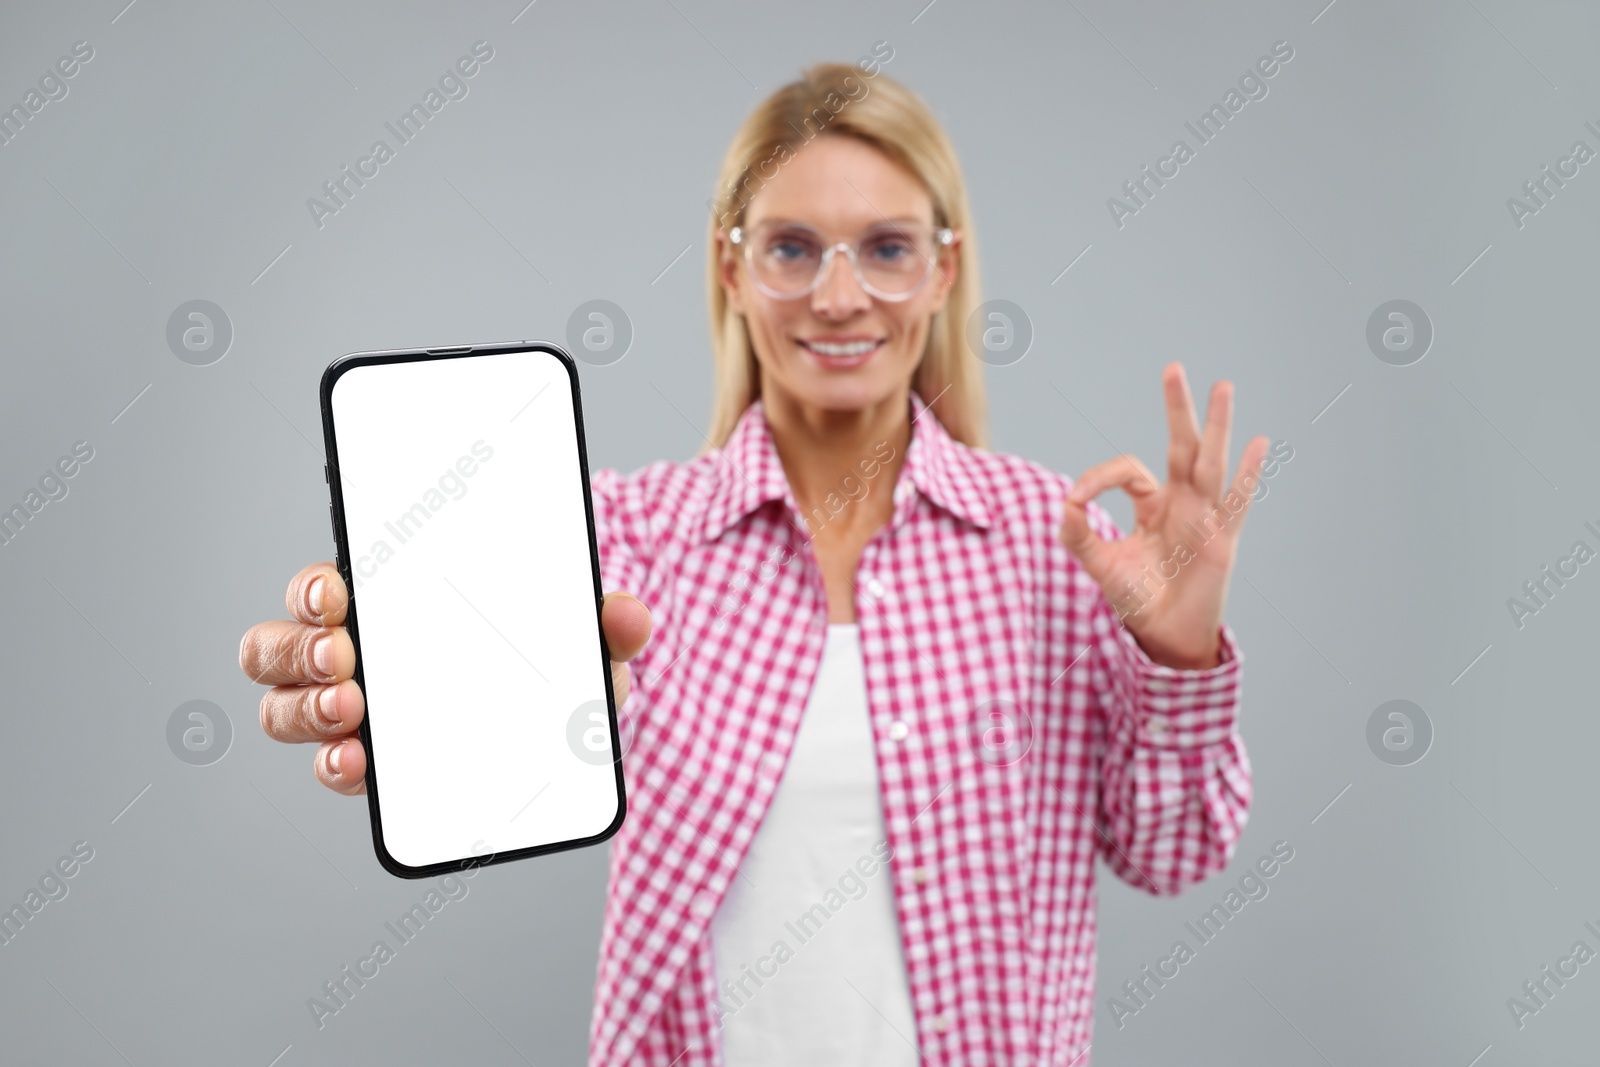 Photo of Happy woman holding smartphone with blank screen and showing OK gesture on grey background, selective focus